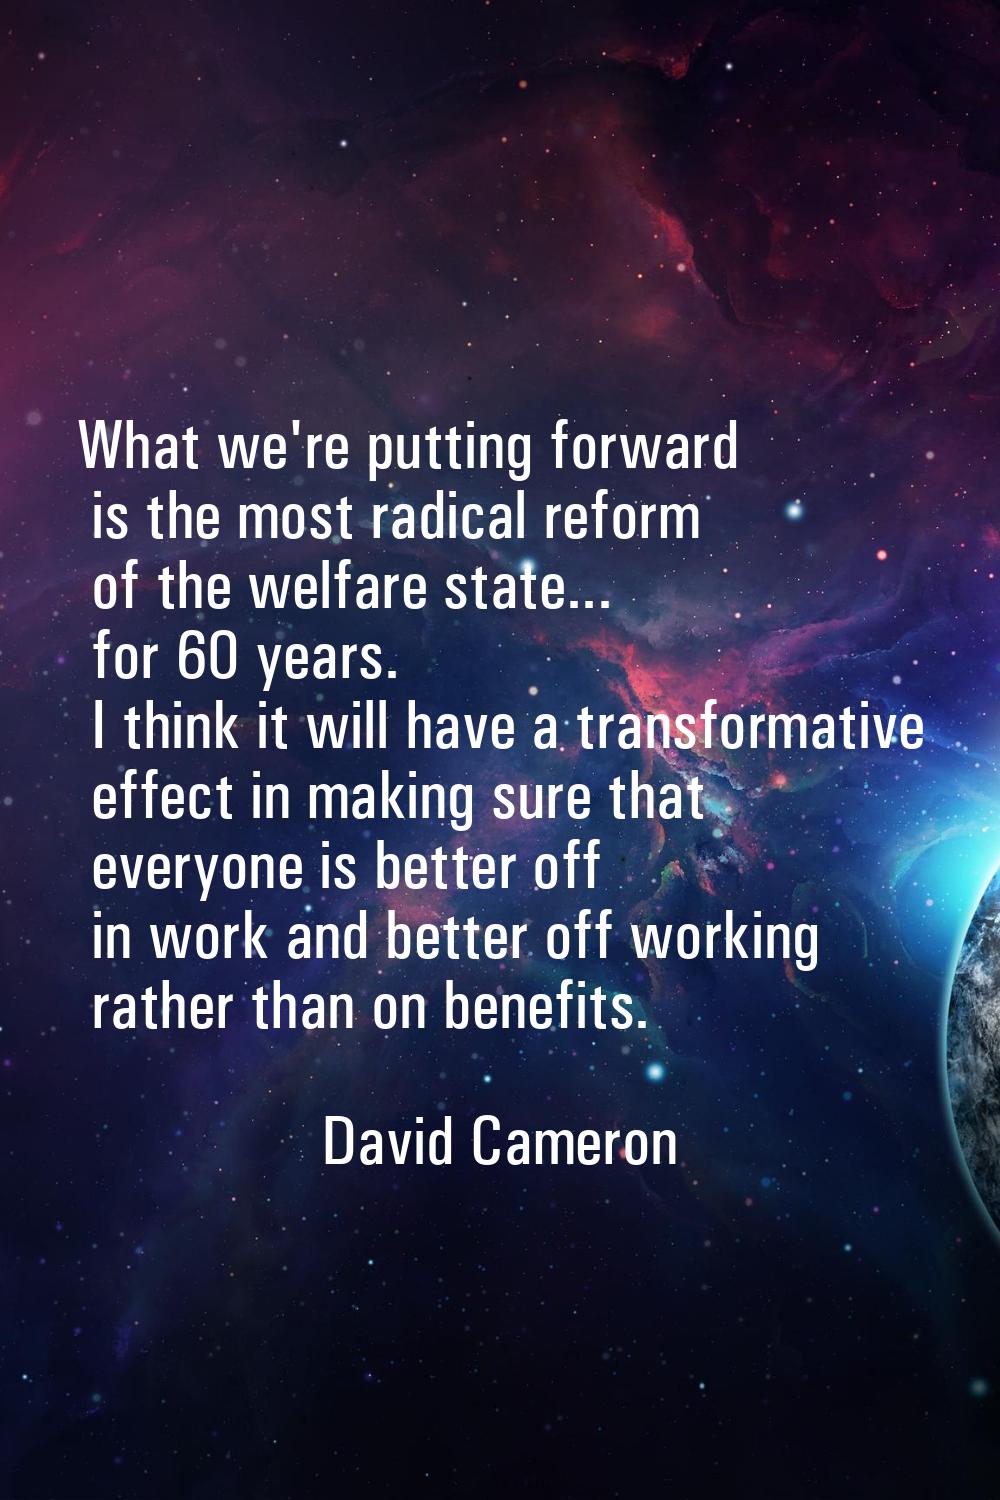 What we're putting forward is the most radical reform of the welfare state... for 60 years. I think